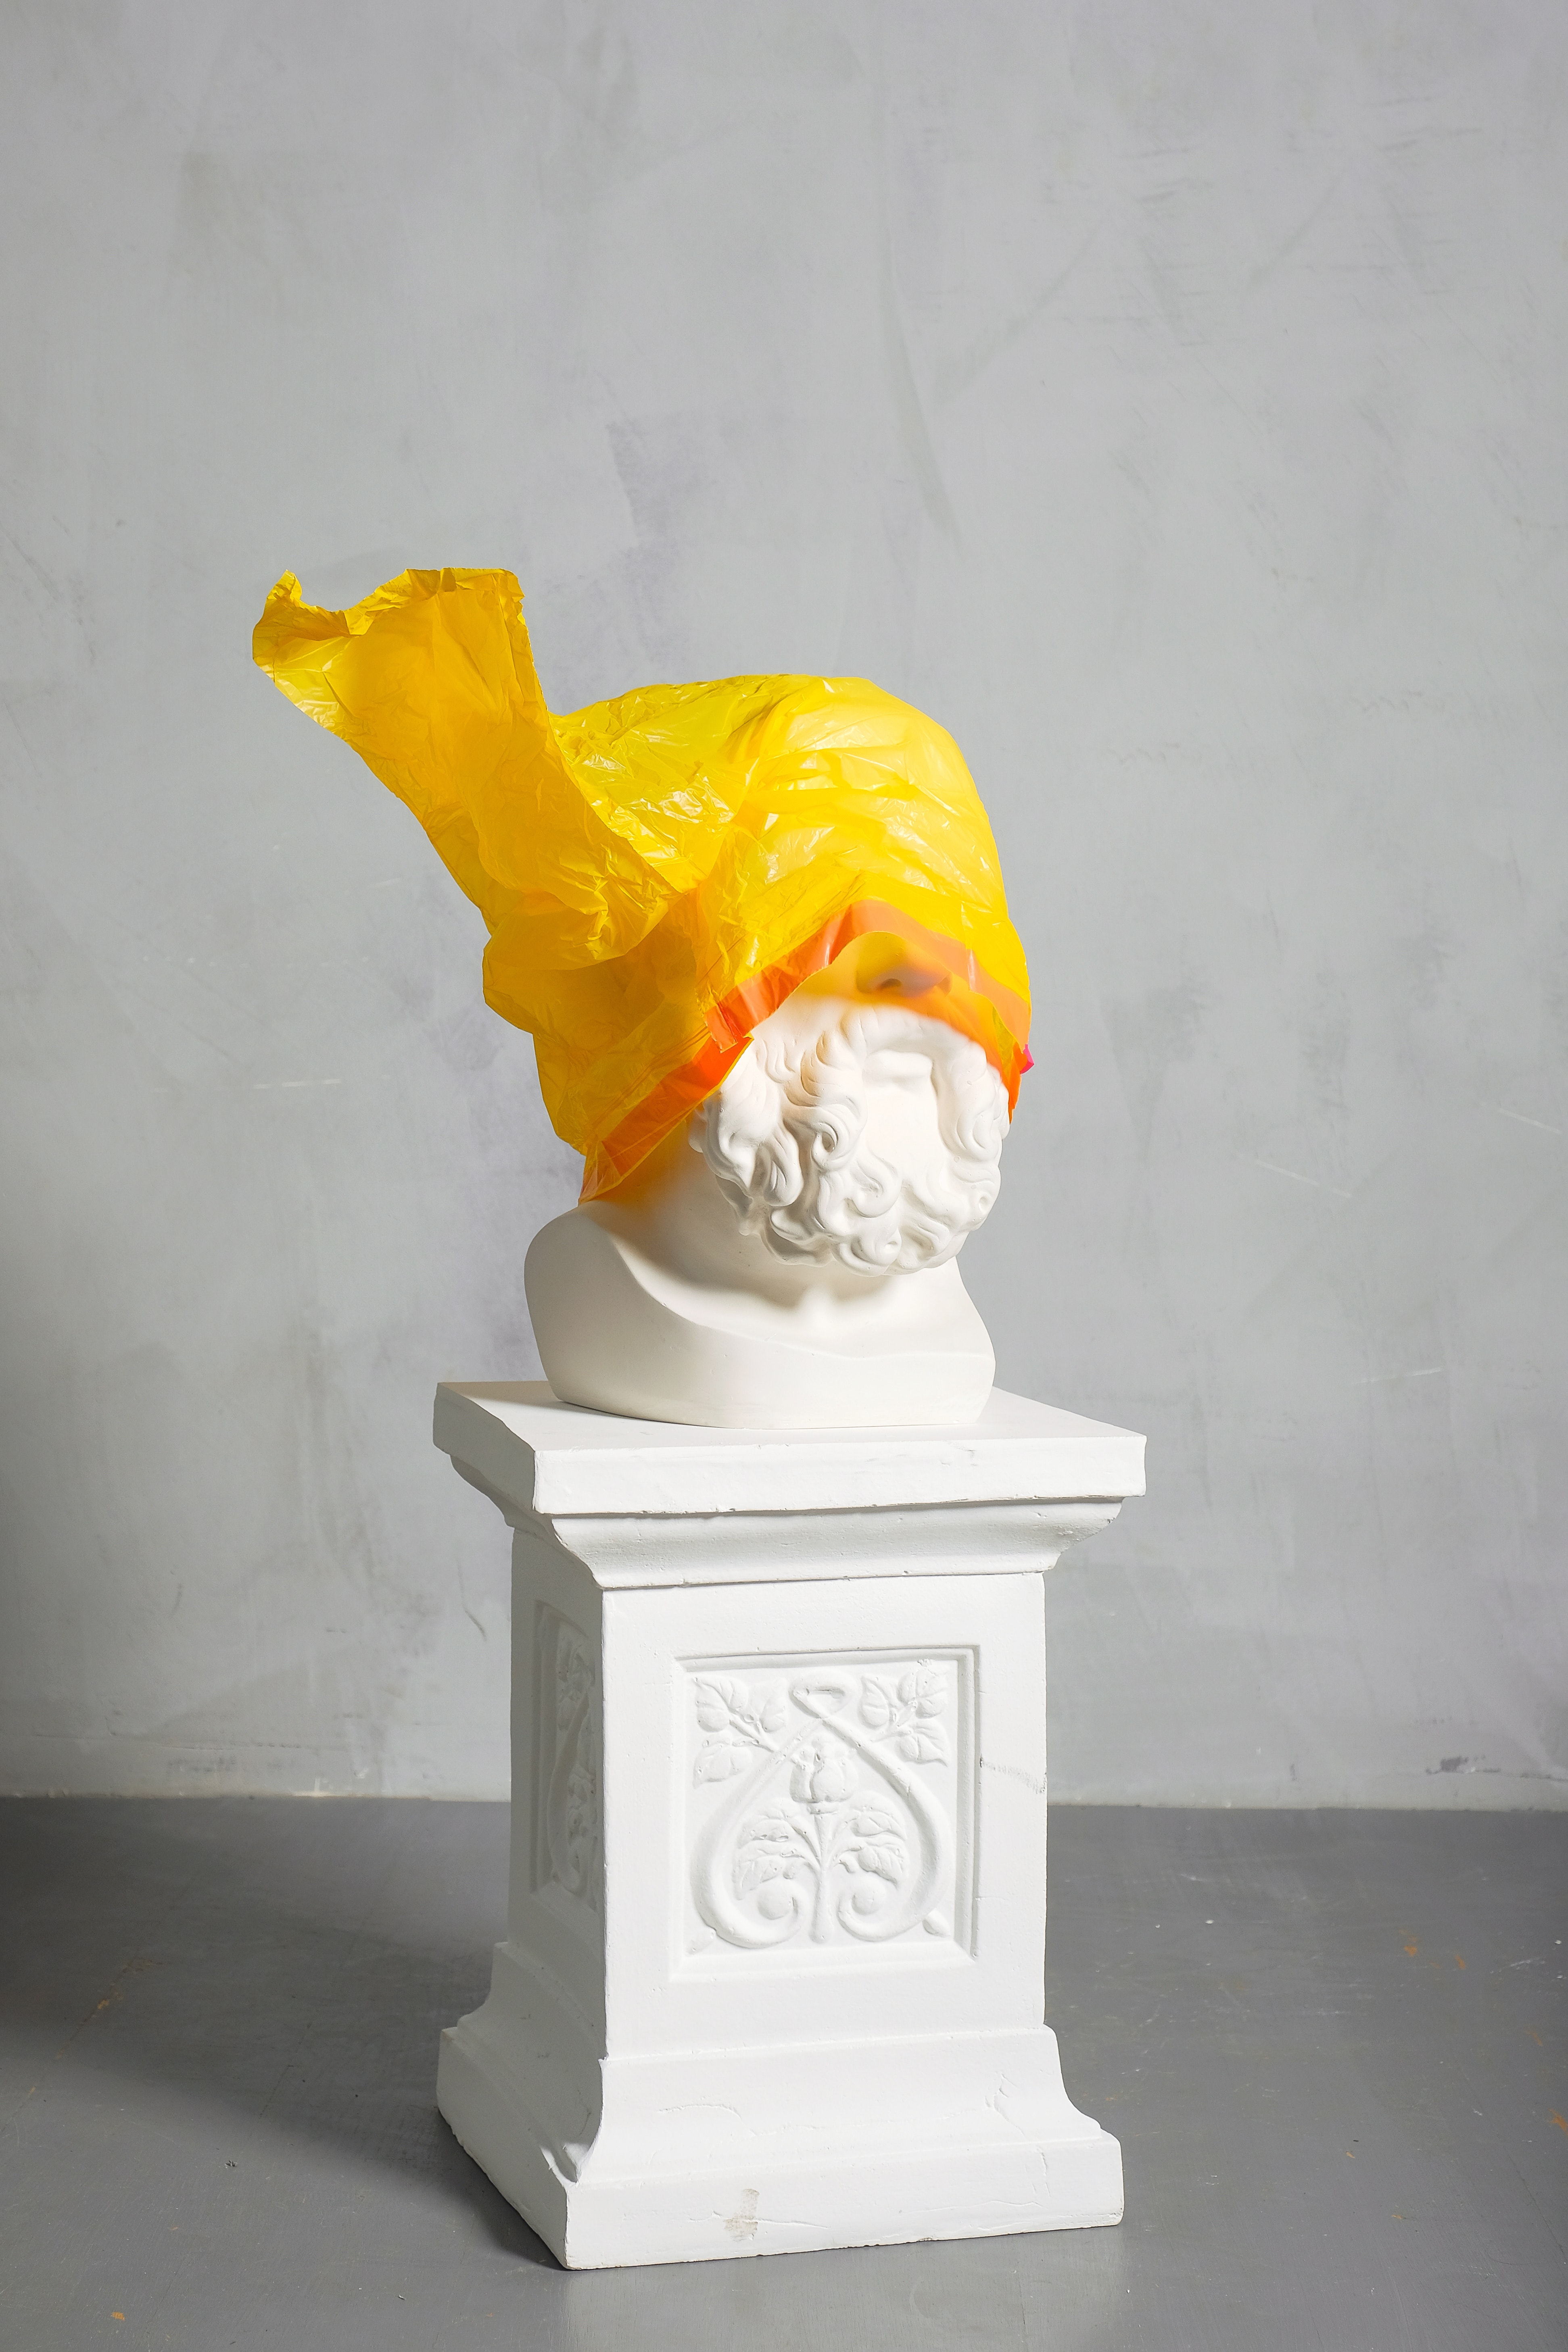 sculpture-covered-yellow-plastic-on-white-background-3683187